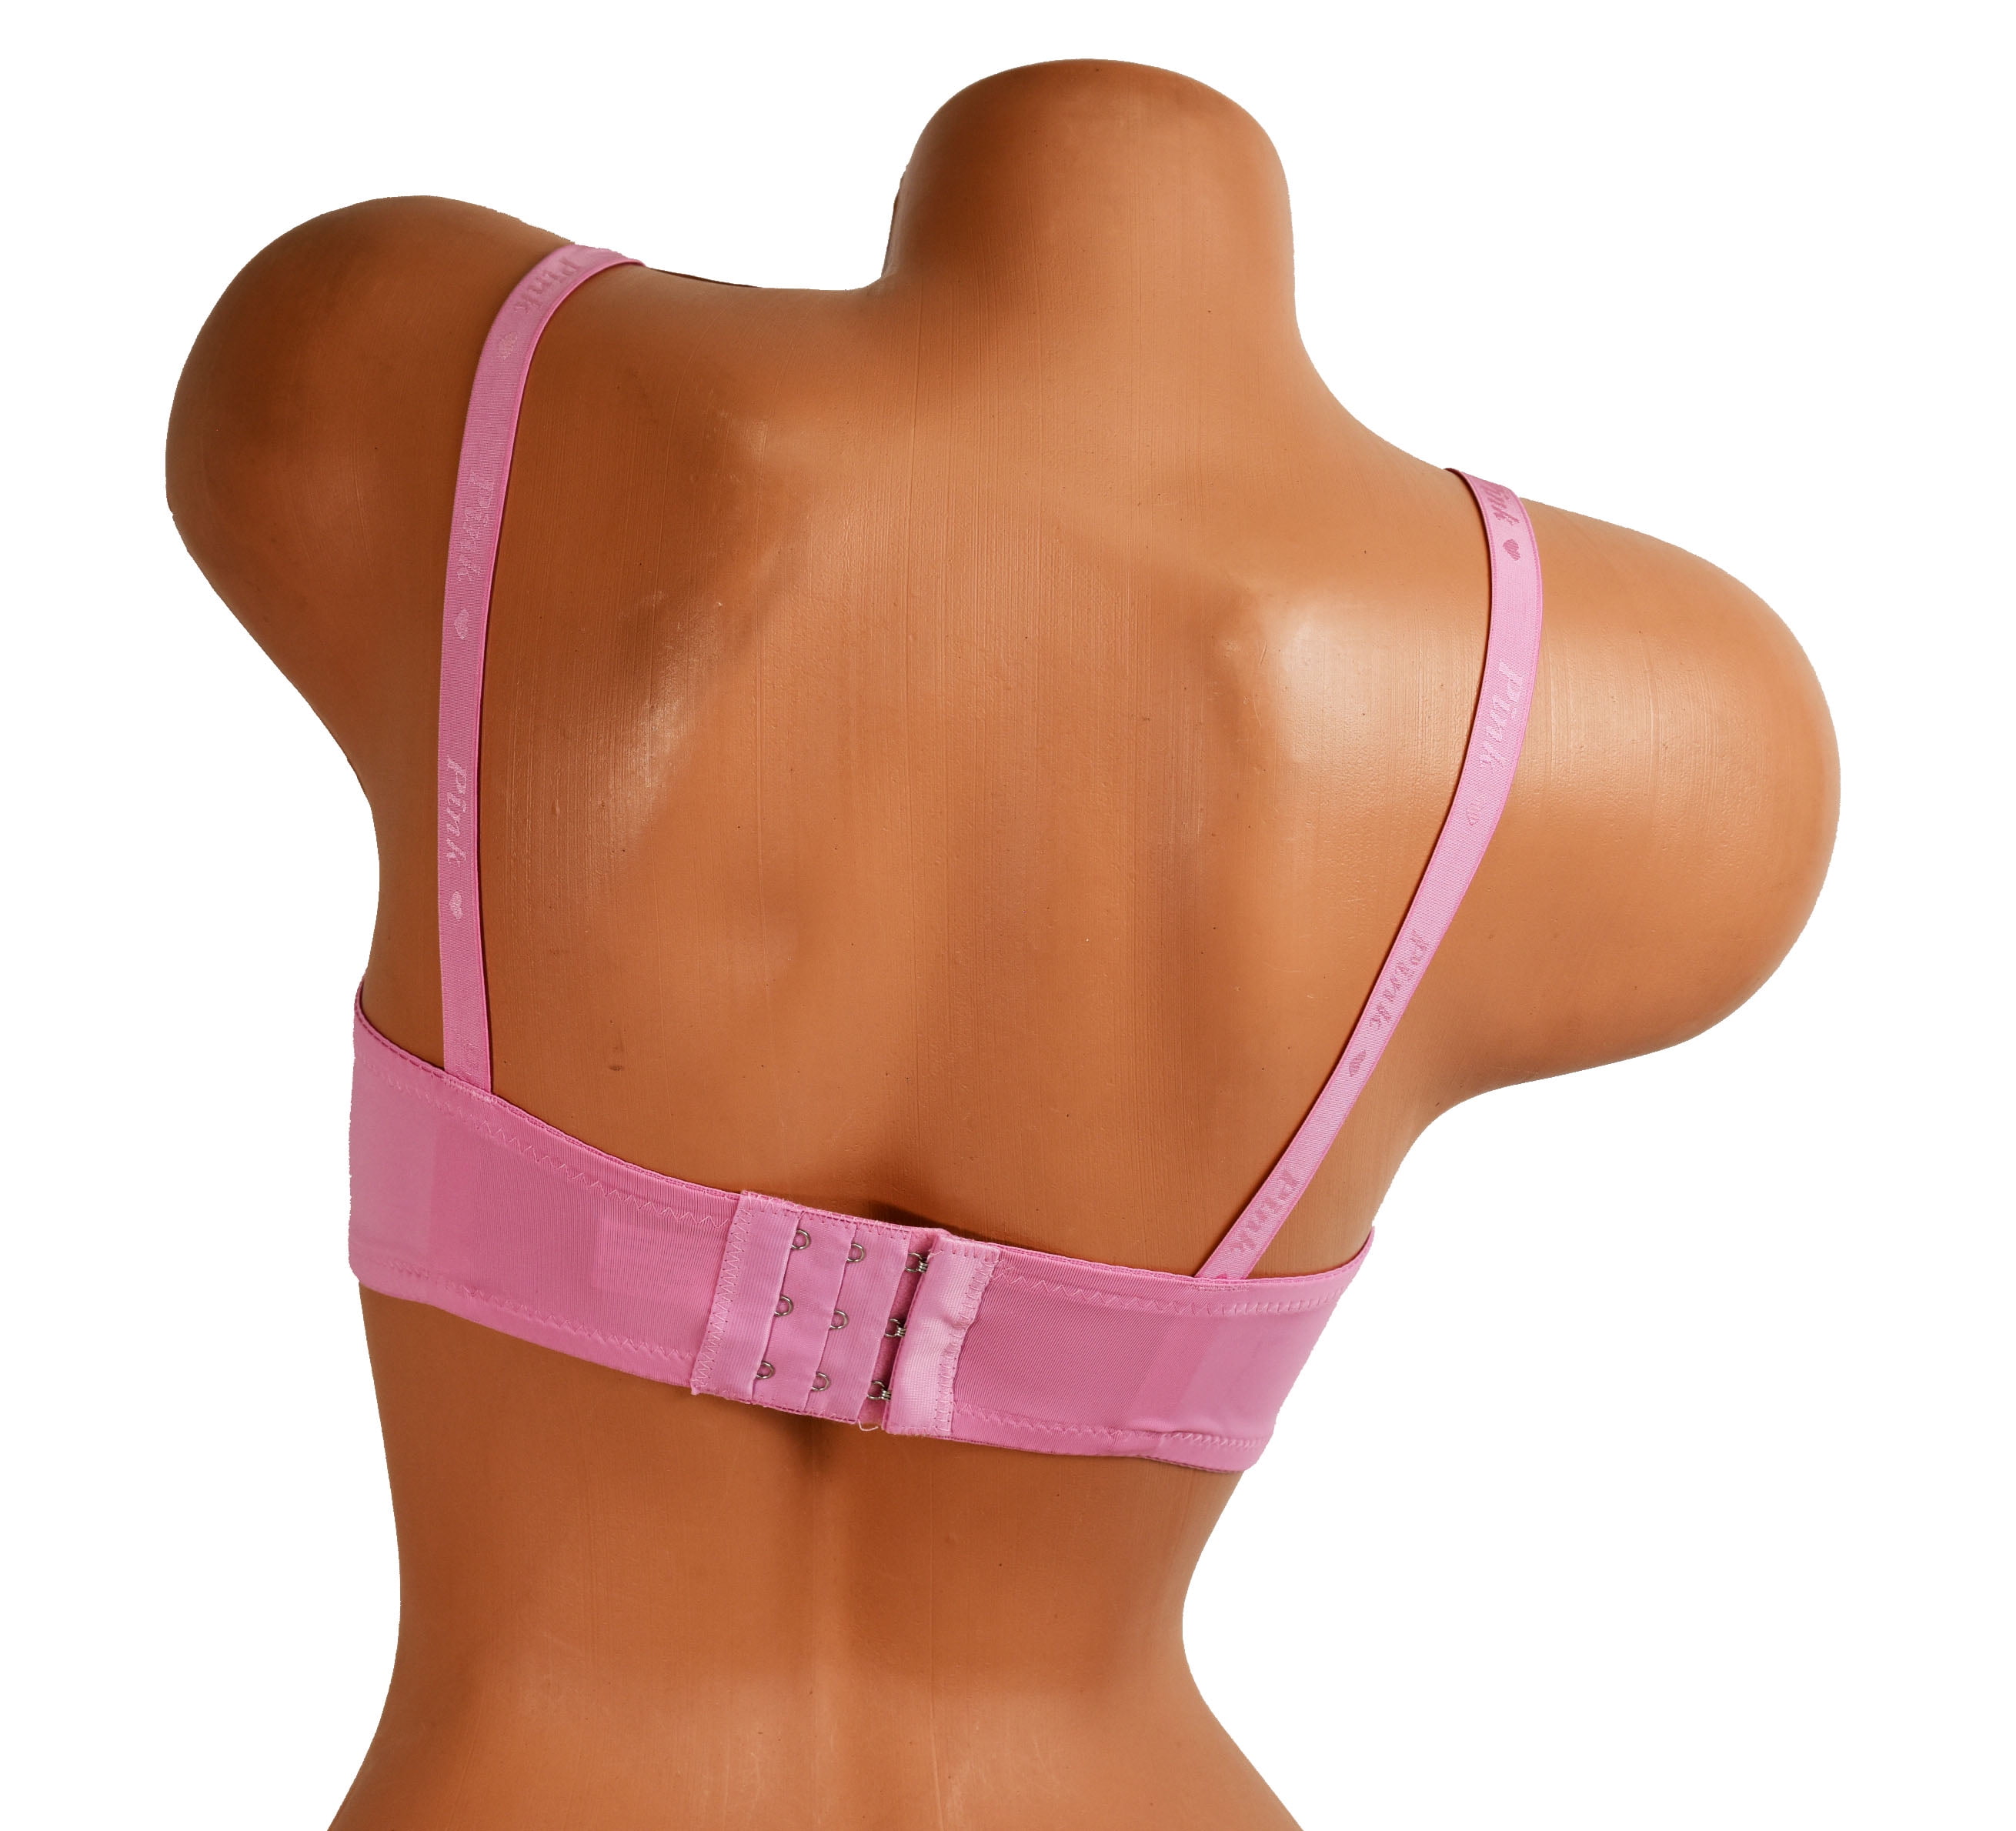 Pink Women Bras 6 pack of Basic No Wire Free Wireless Bra B cup C cup (6647)